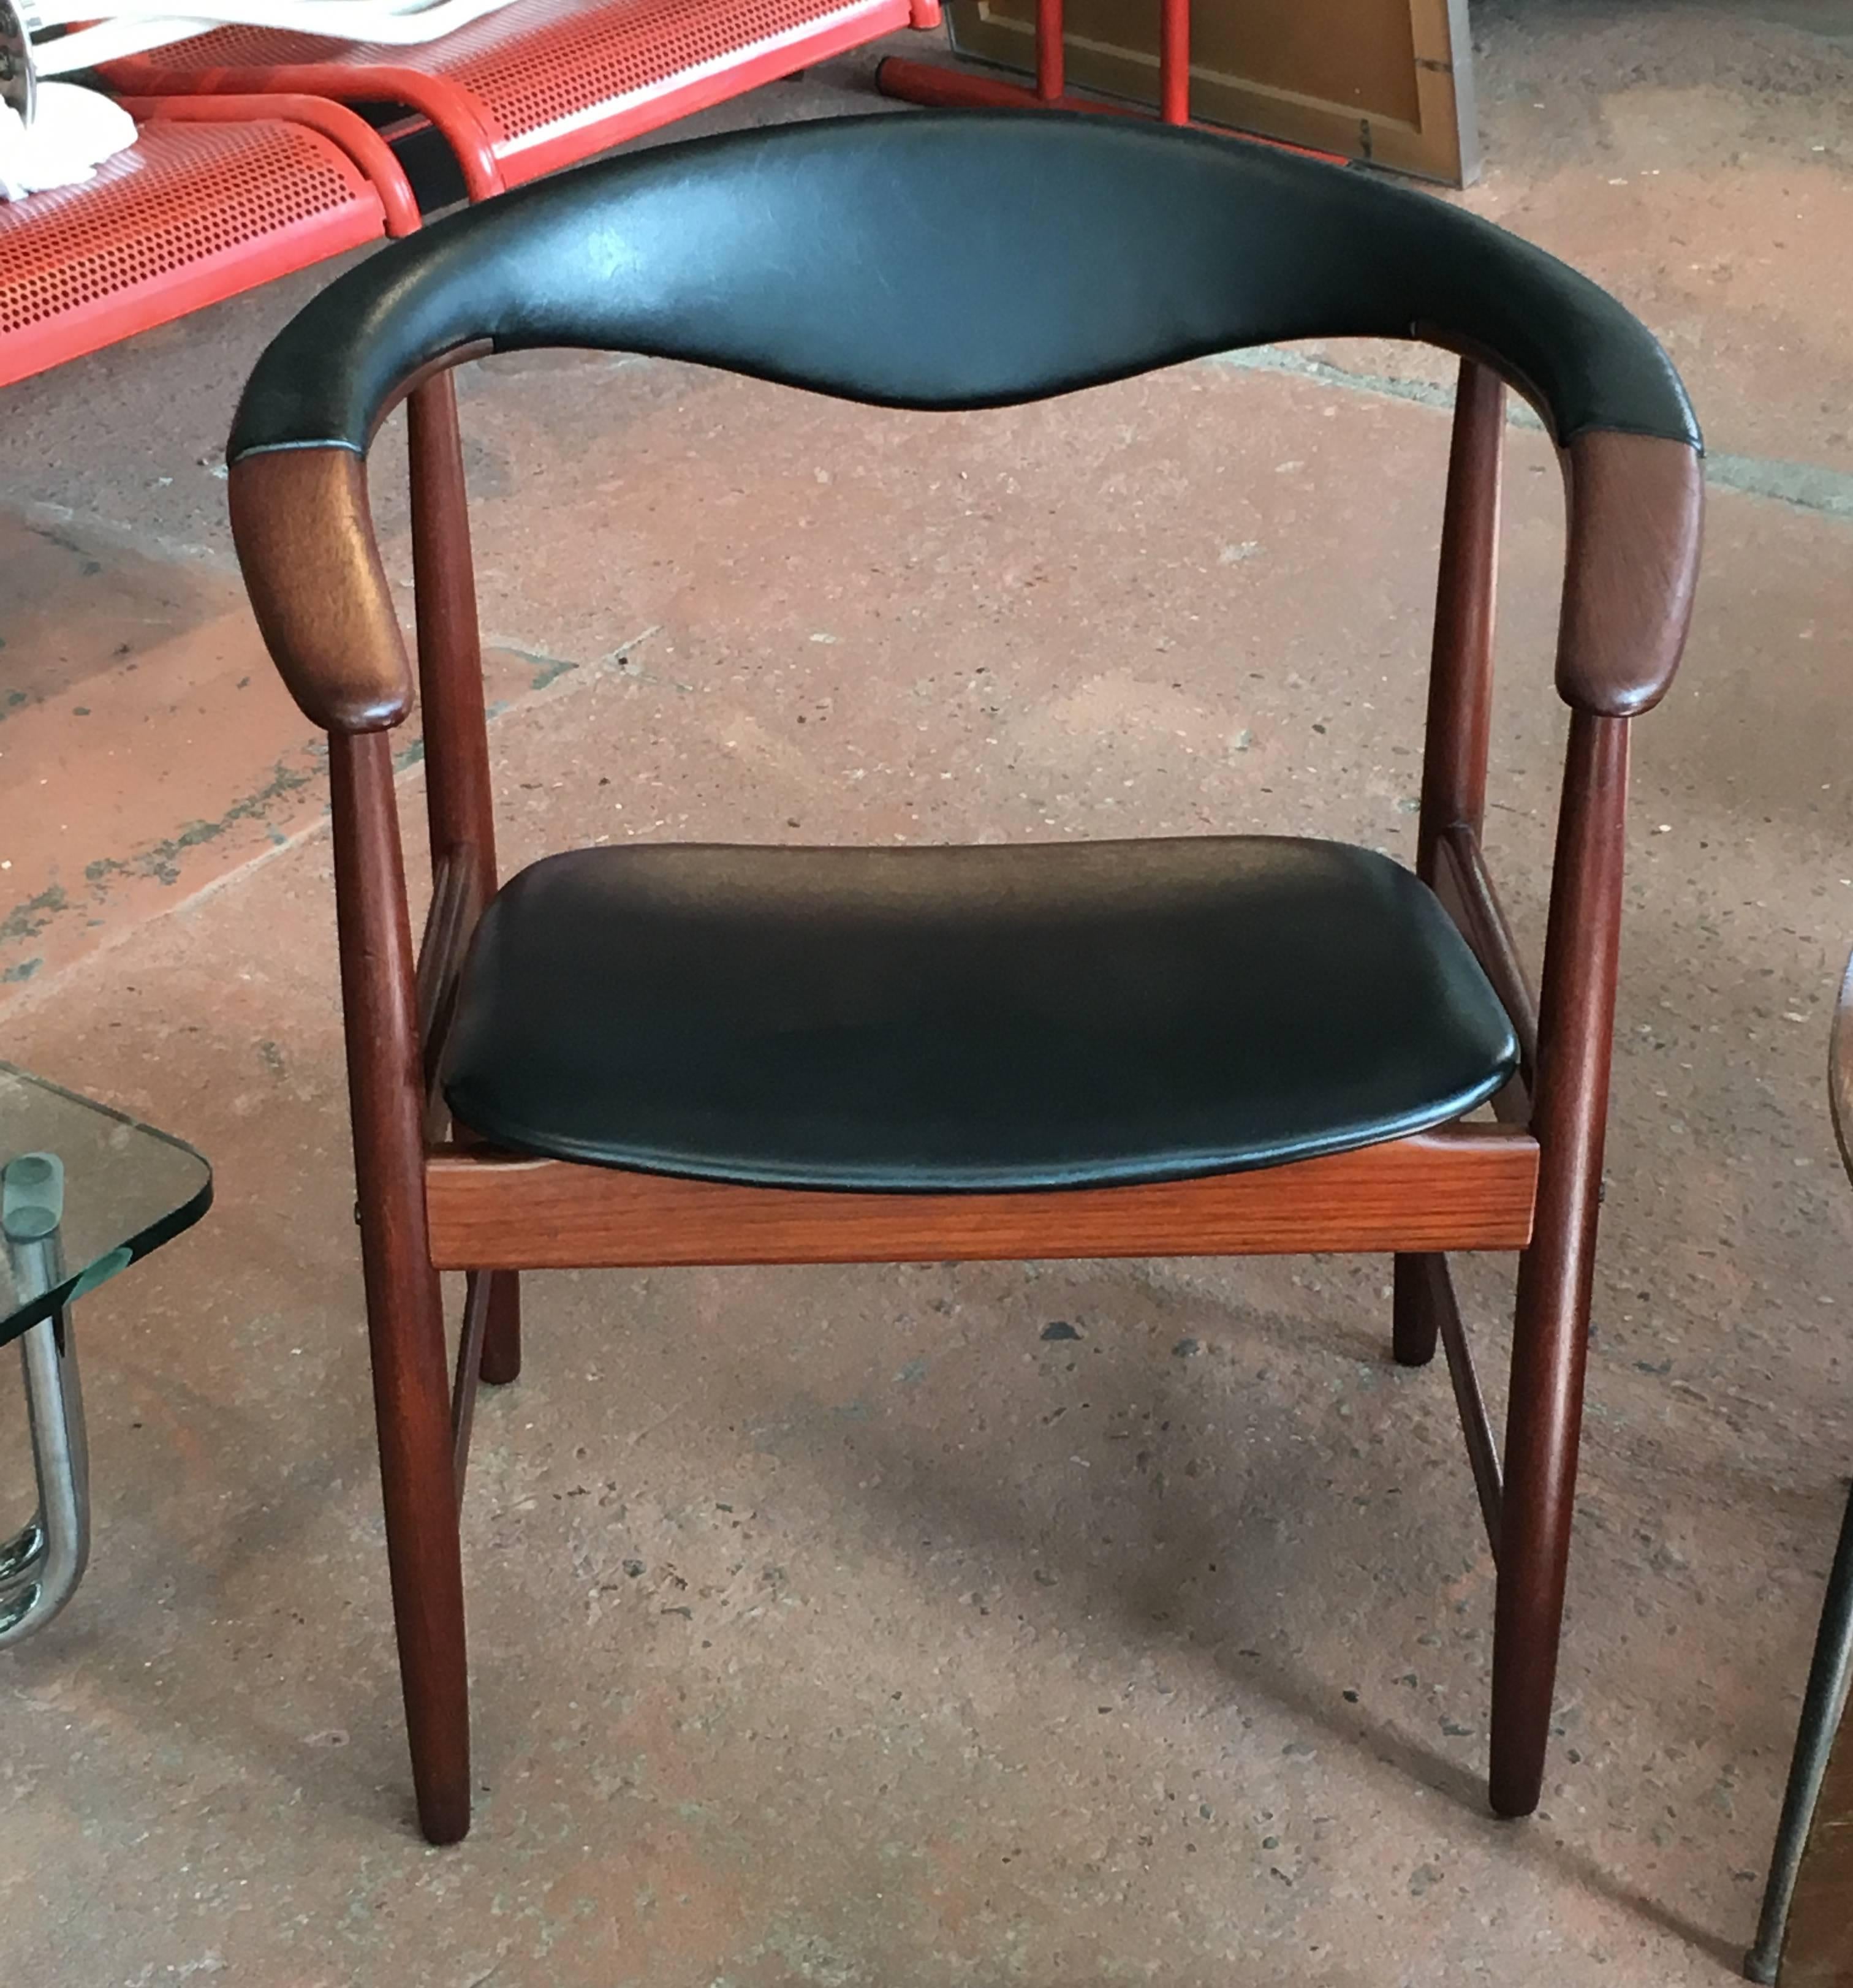 Great example of chair 171, an Arne Hovmand-Olsen design from 1958; teak and black leather armchair or desk chair.